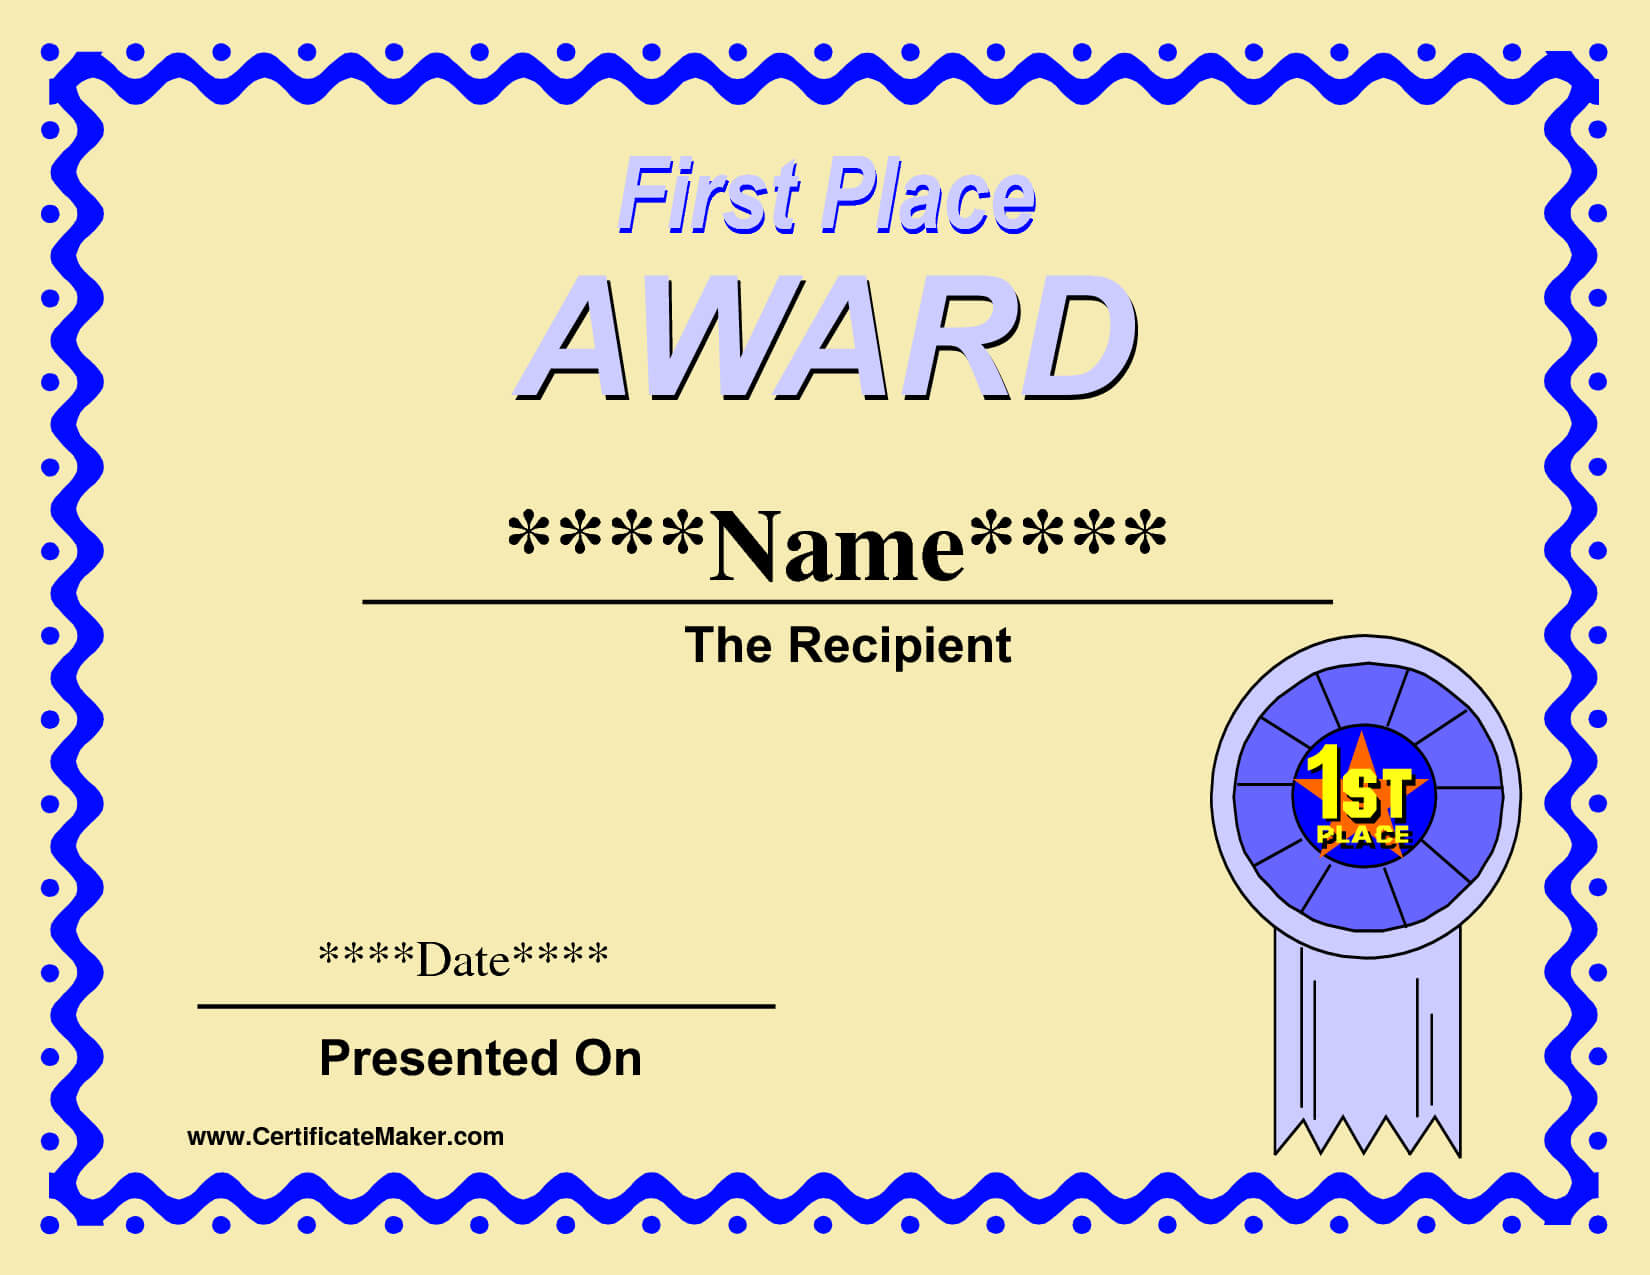 Prize Certificate Template Free – Zimer.bwong.co Intended For First Place Award Certificate Template